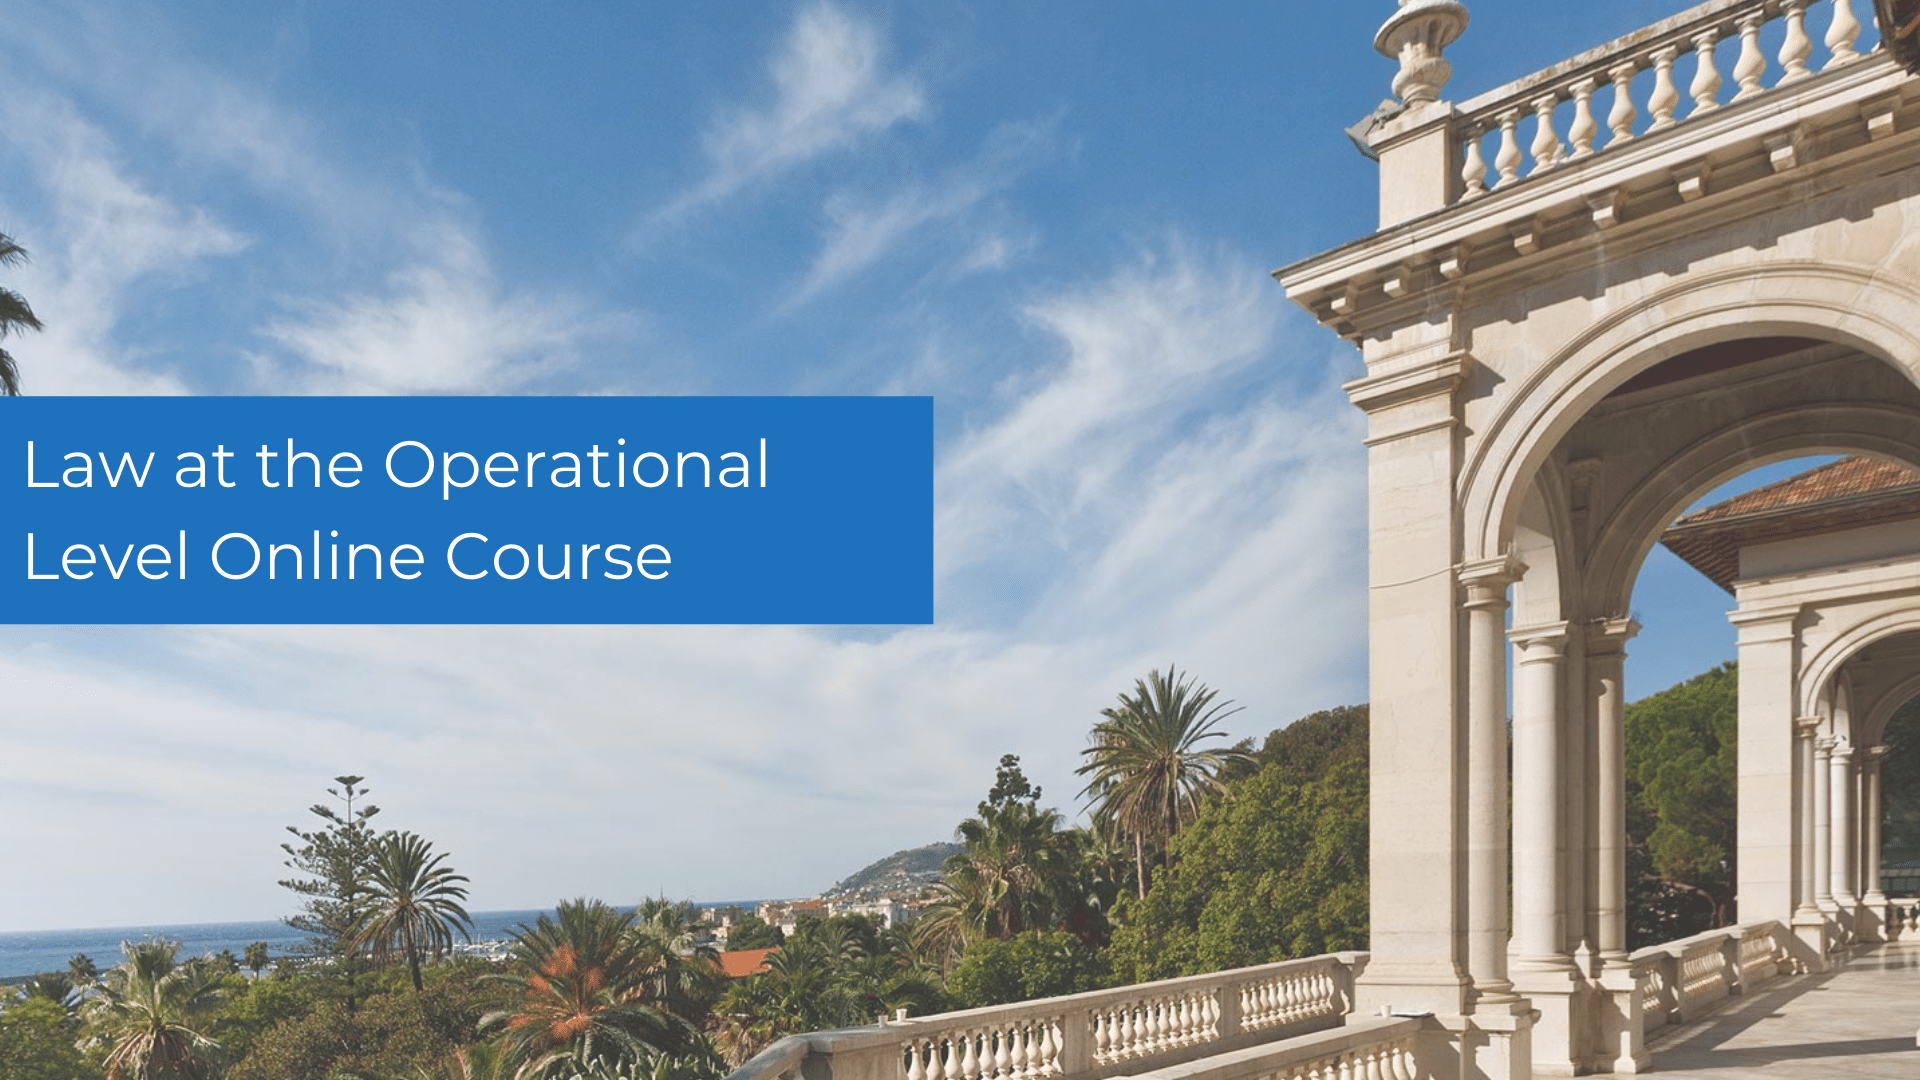 2<sup>nd</sup> Law at the Operational Level Online Course – Registration is open!